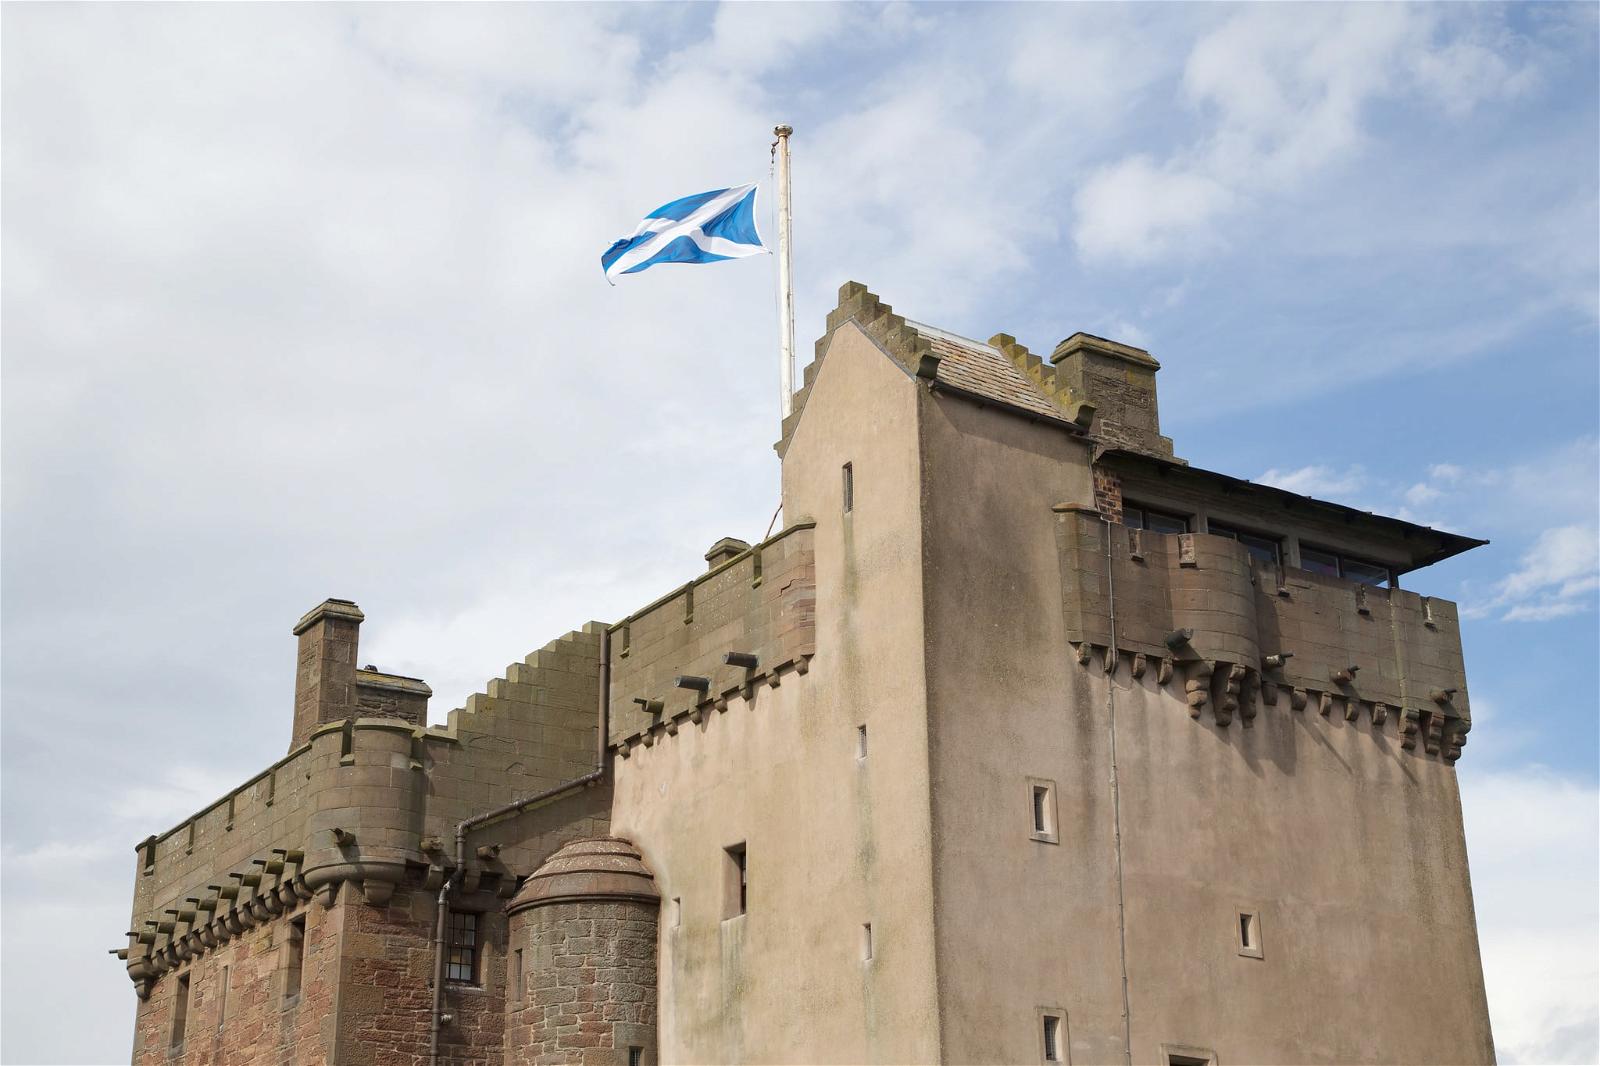 Image de Broughty Castle. castle museum broughtyferry dundee angus 17thcentury victorian nophotoshop 1860s stronghold saltire 16thcentury unedited rebuilt 15thcentury scheduled straightfromthecamera 1490s broughtycastle dundeecitycouncil scheduledmonument sirrobertrowandanderson refortification 149096